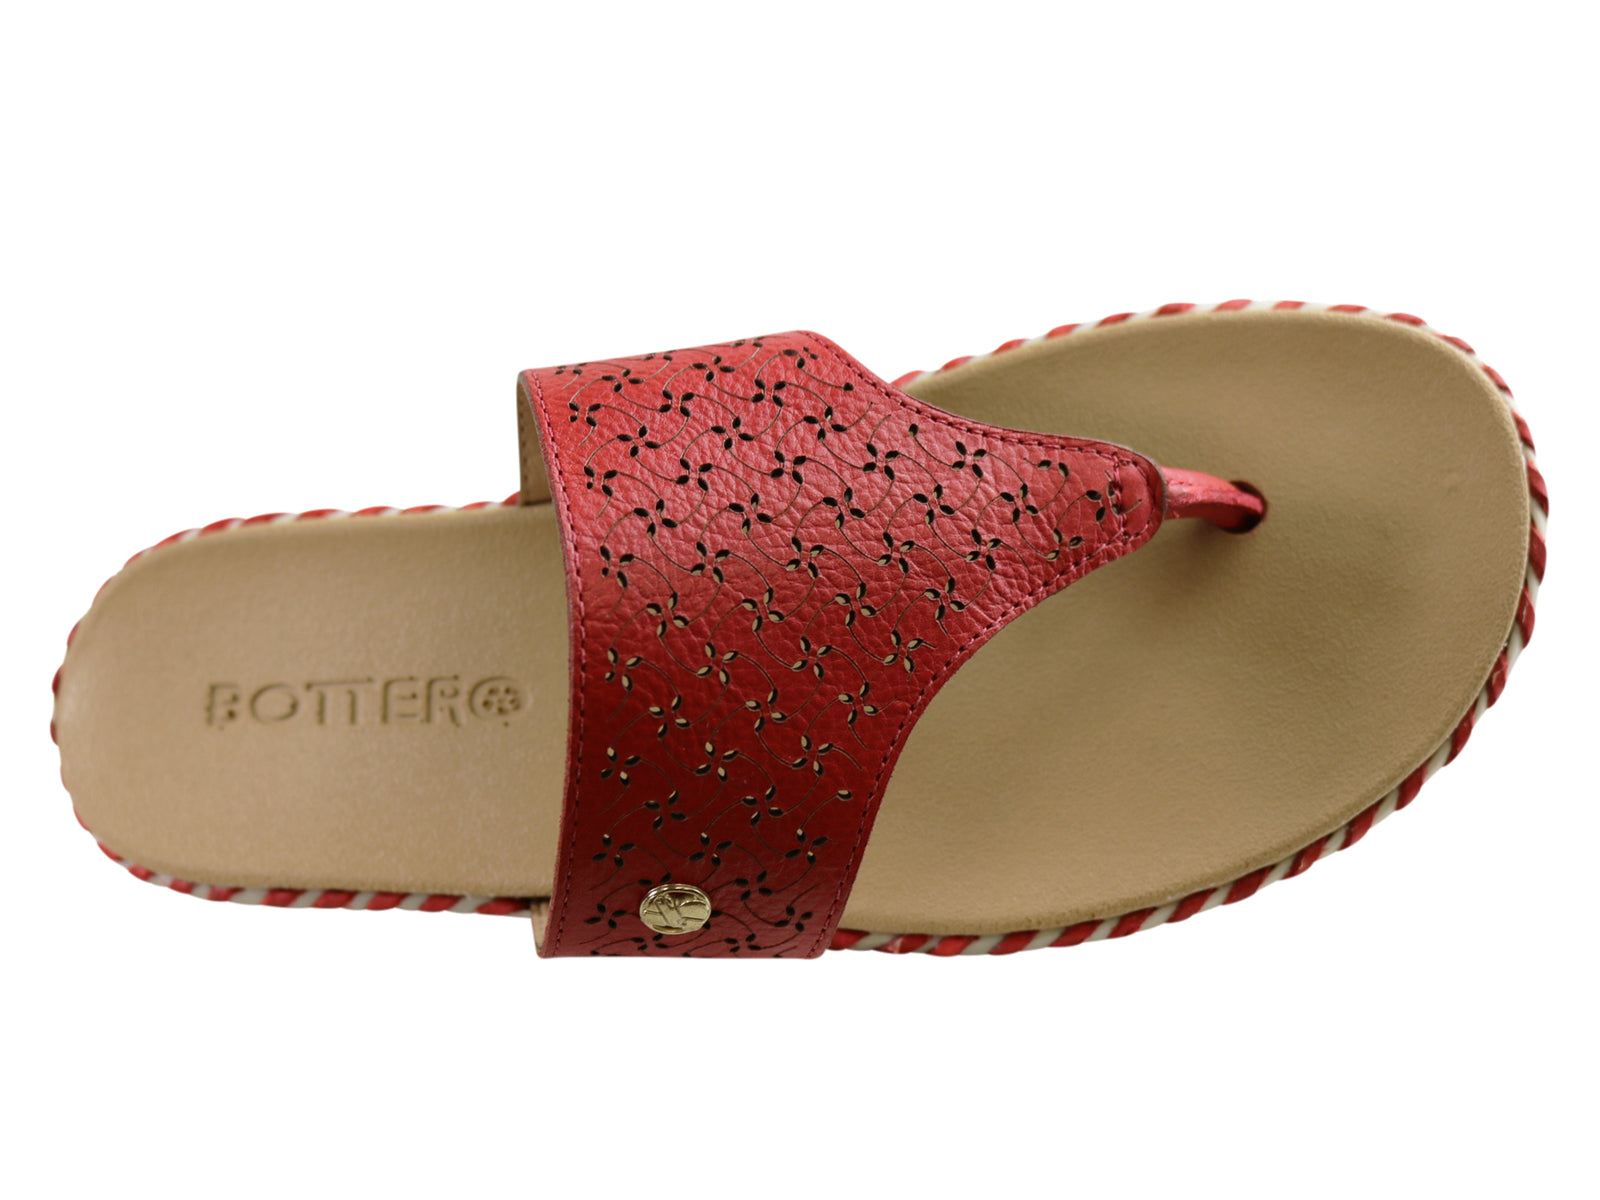 Bottero Bahamas Womens Comfort Leather Thongs Made In Brazil